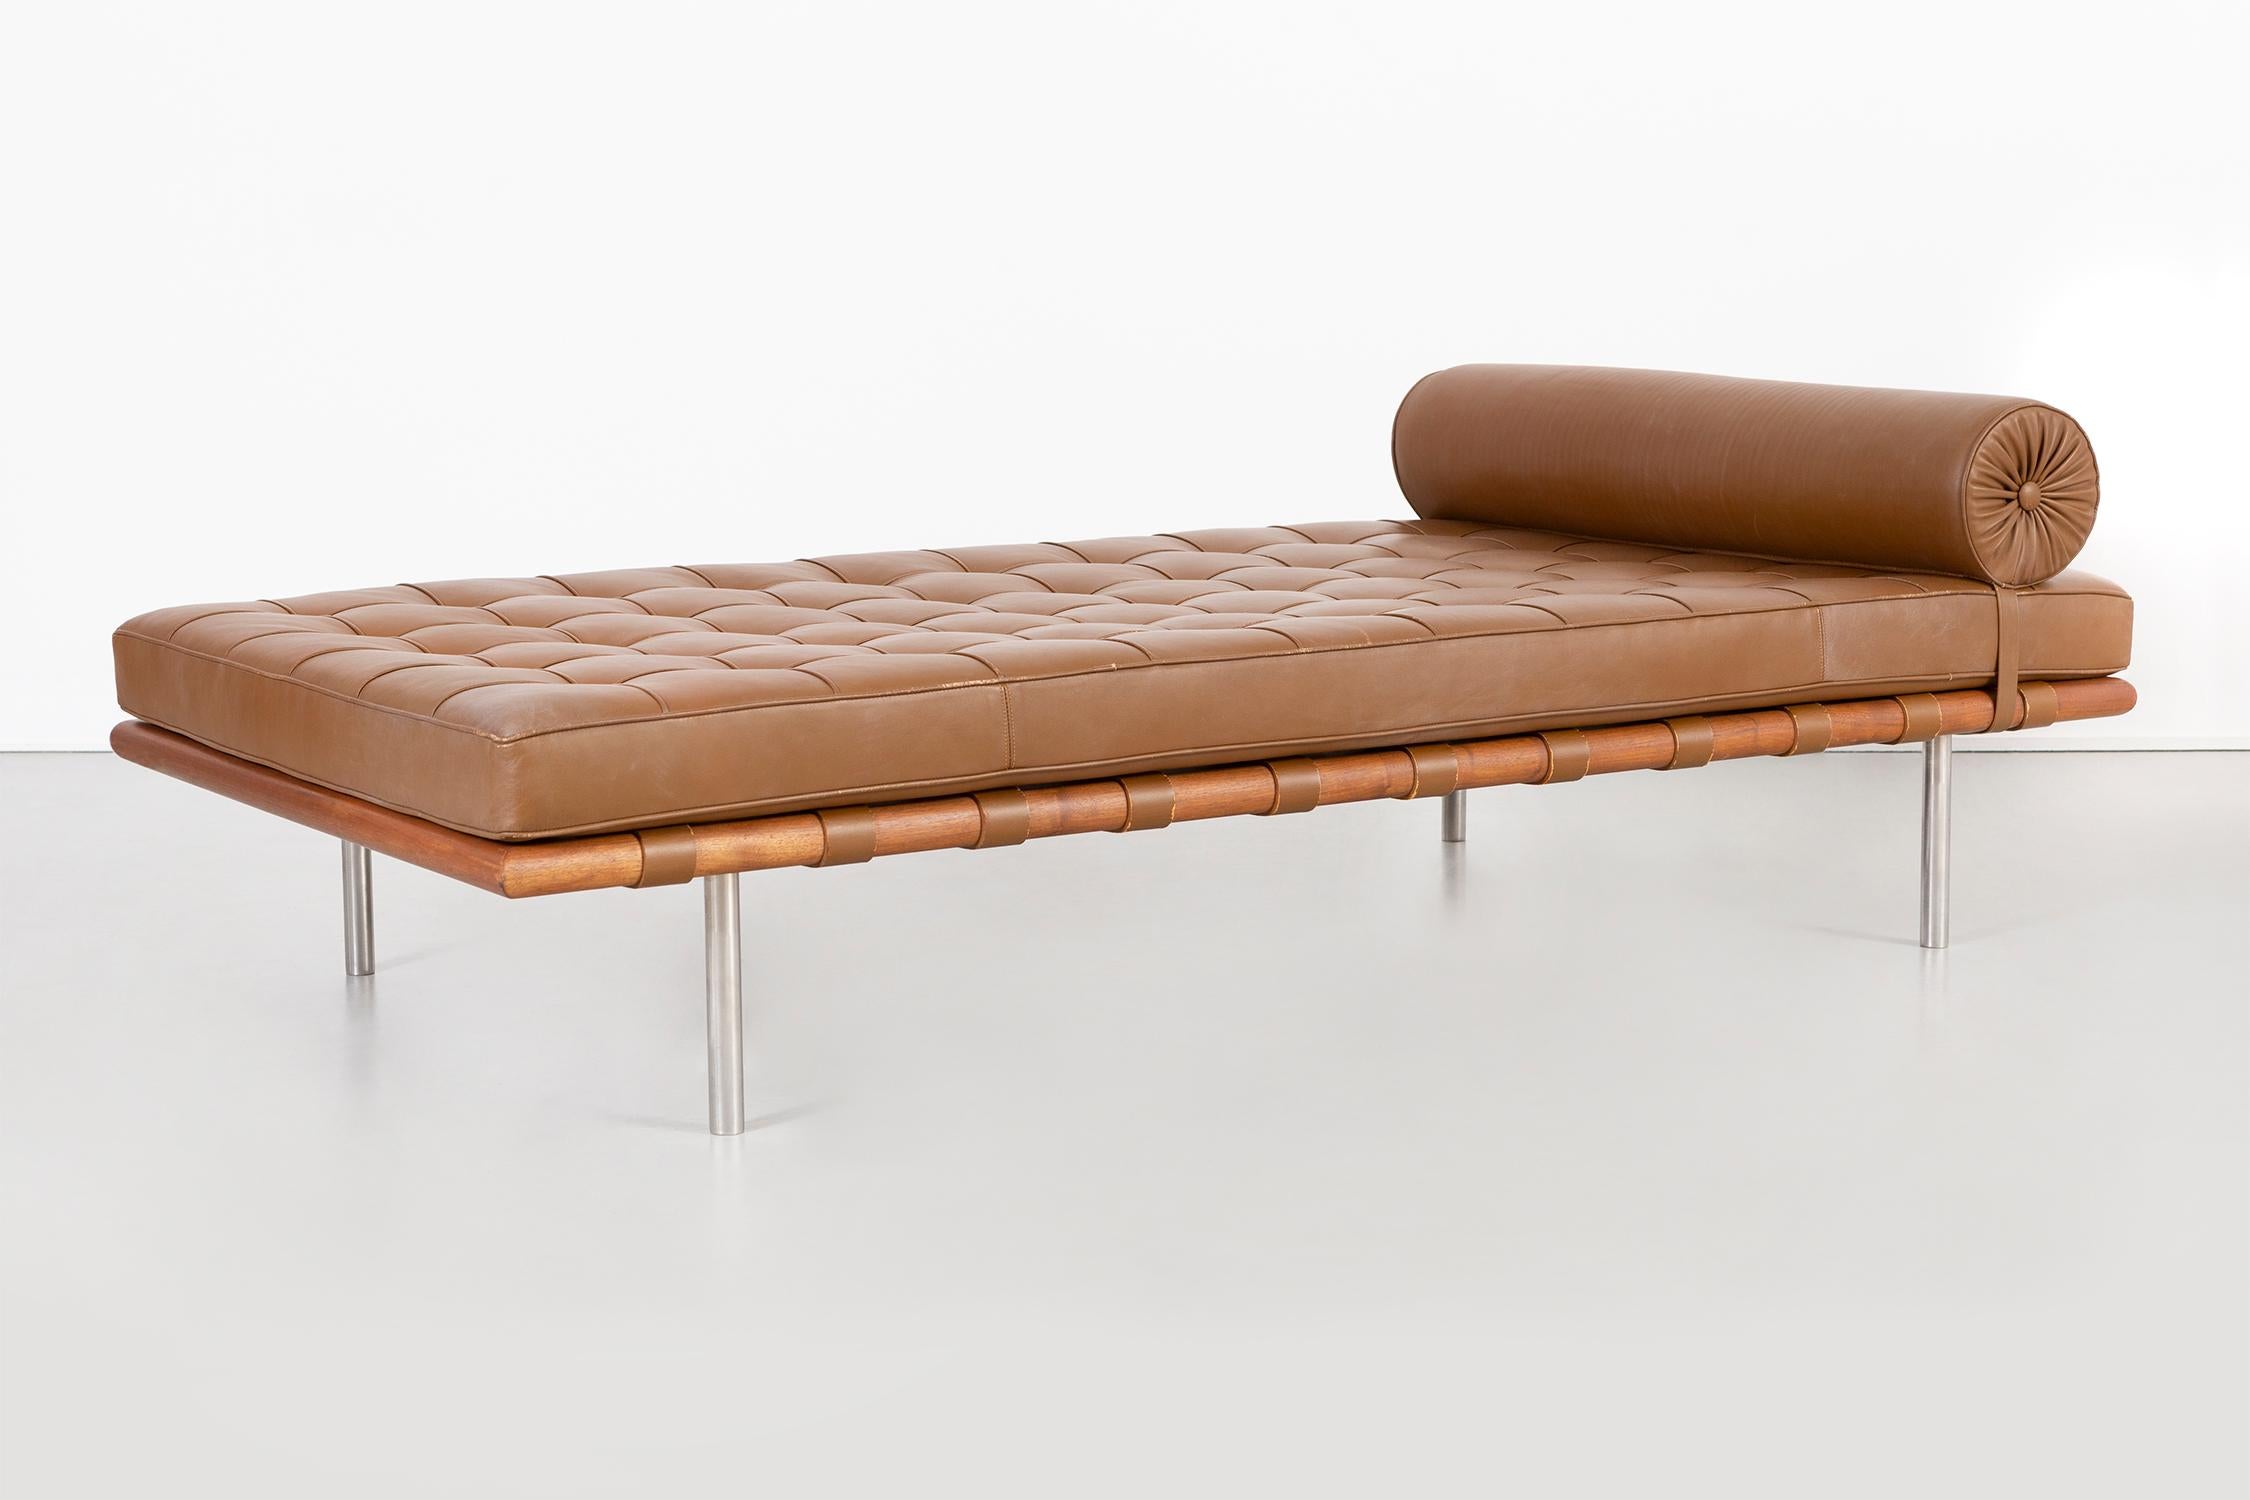 Barcelona couch 

designed by Mies Van Der Rohe

USA, circa 1971

leather + walnut + polished stainless steel

original leather reconditioned in excellent condition with new foam

retains the original Knoll label dated 1971

A portion of